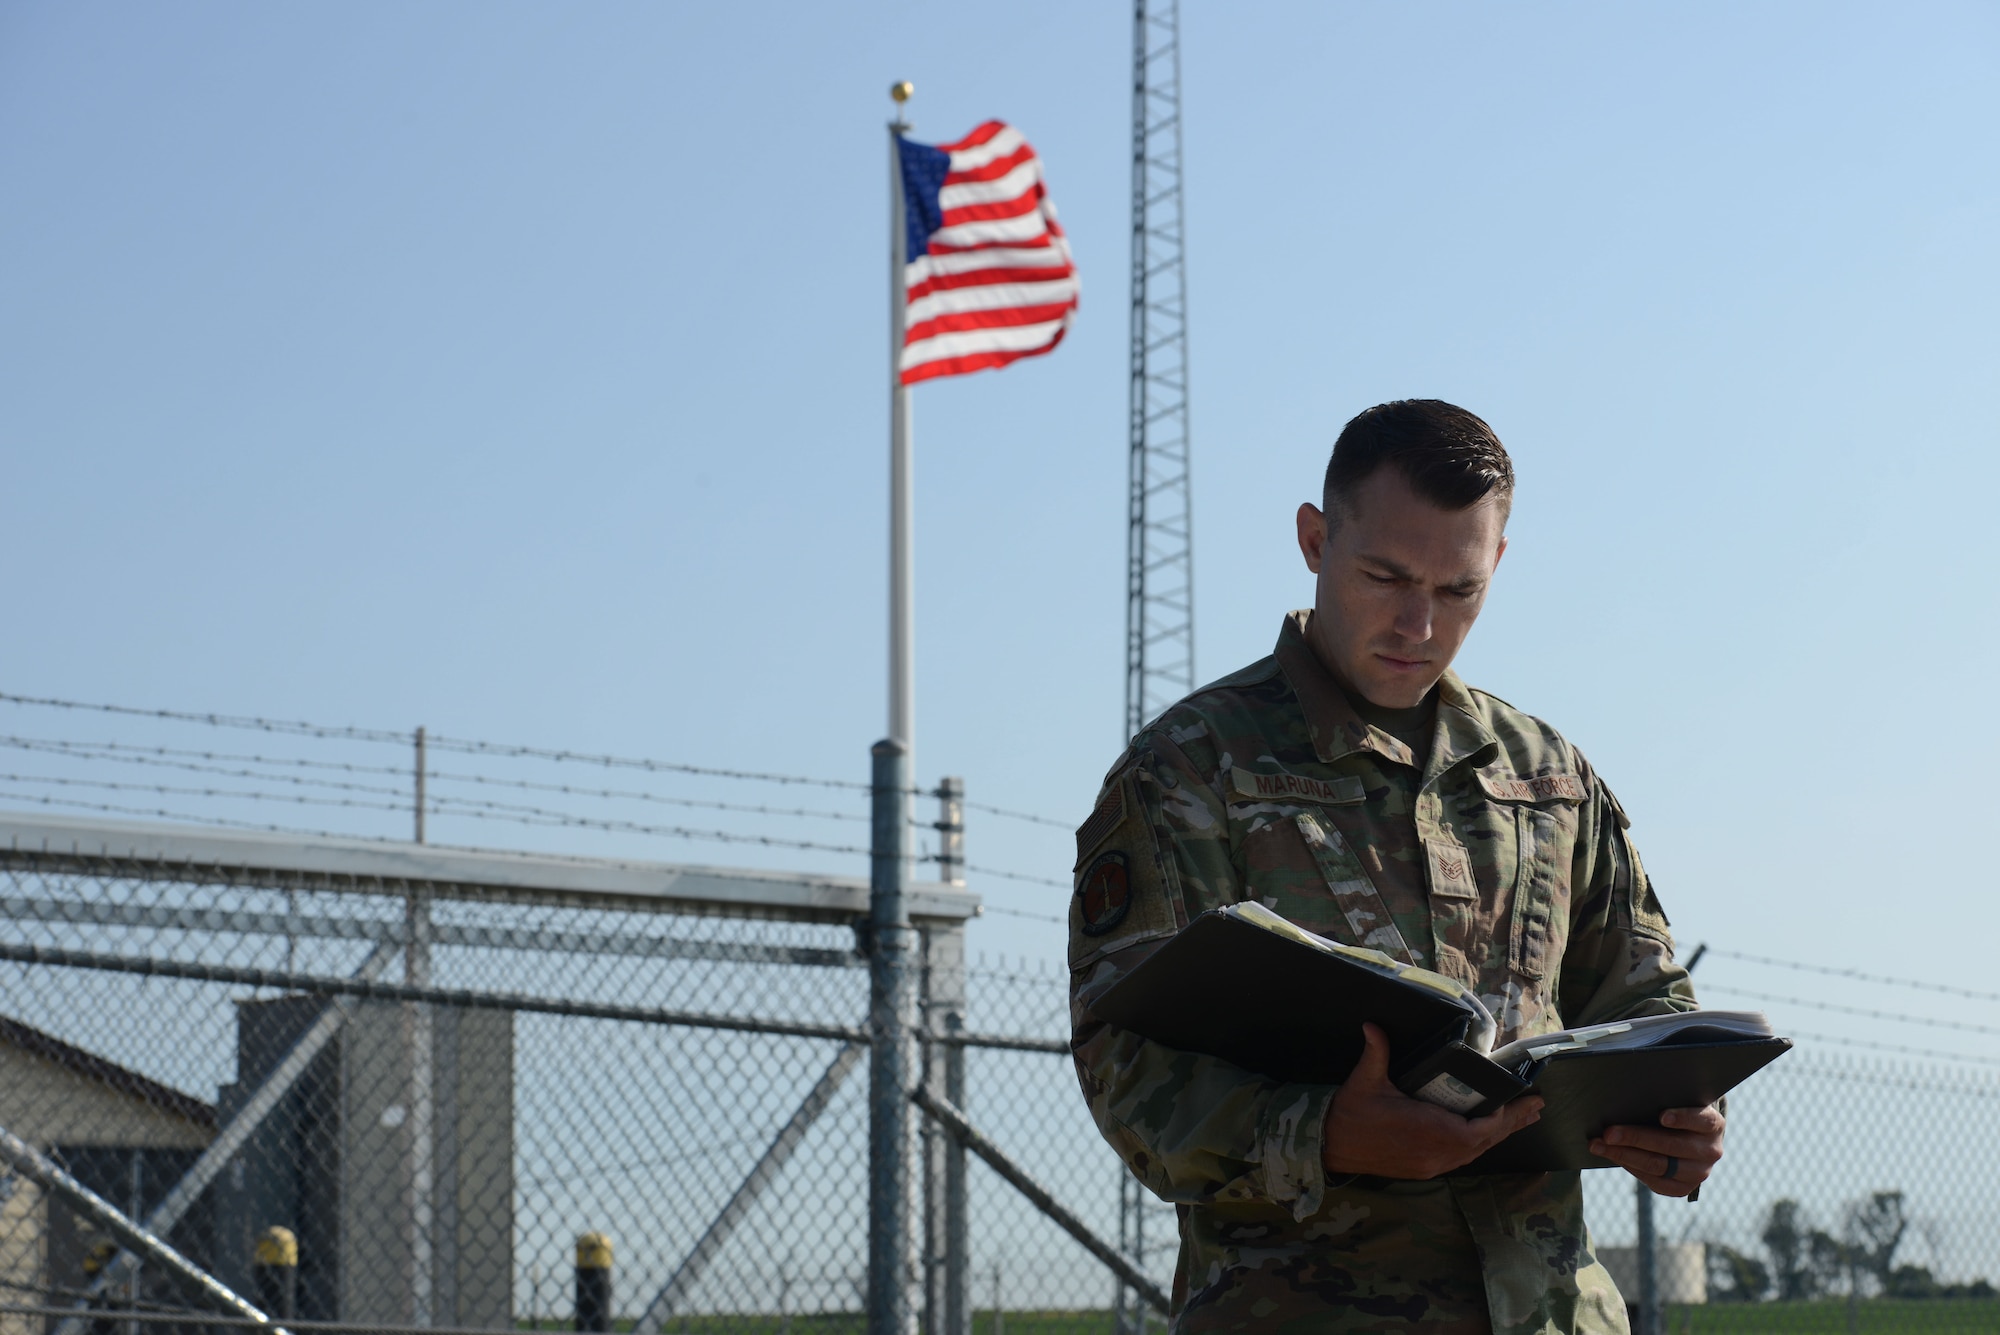 U.S. Air Force Staff Sgt. Edward Maruna, 742nd Missile Squadron facility manager, reviews documents pertinent to his duties at Minot Air Force Base, North Dakota, July 7, 2023. Maruna’s job is to perform equipment checks and maintain efficiency on the missile site. (U.S. Air Force photo by Airman 1st Class Trust Tate)